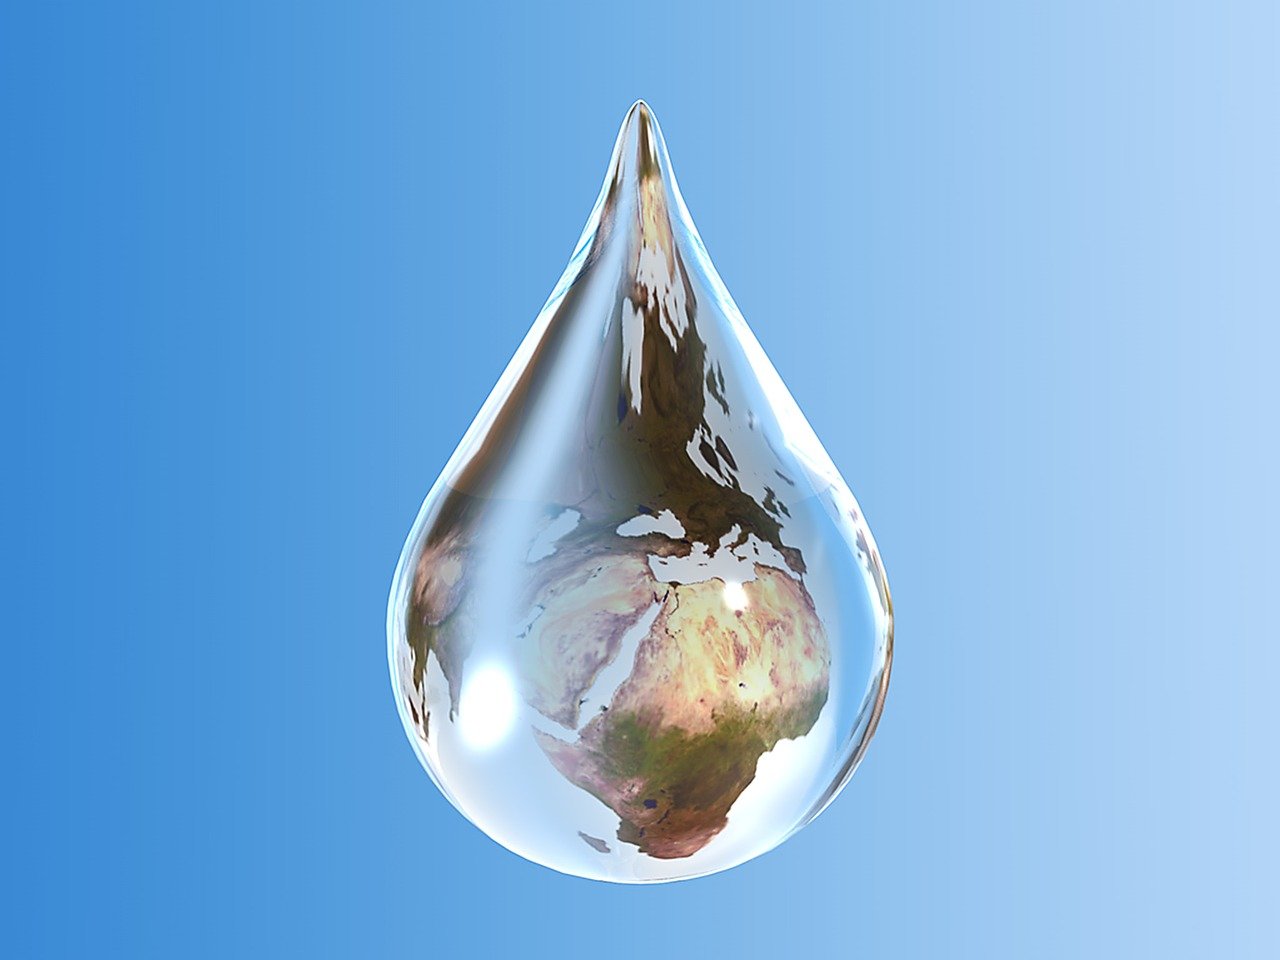 Future of Water, Sustainable Water Solutions